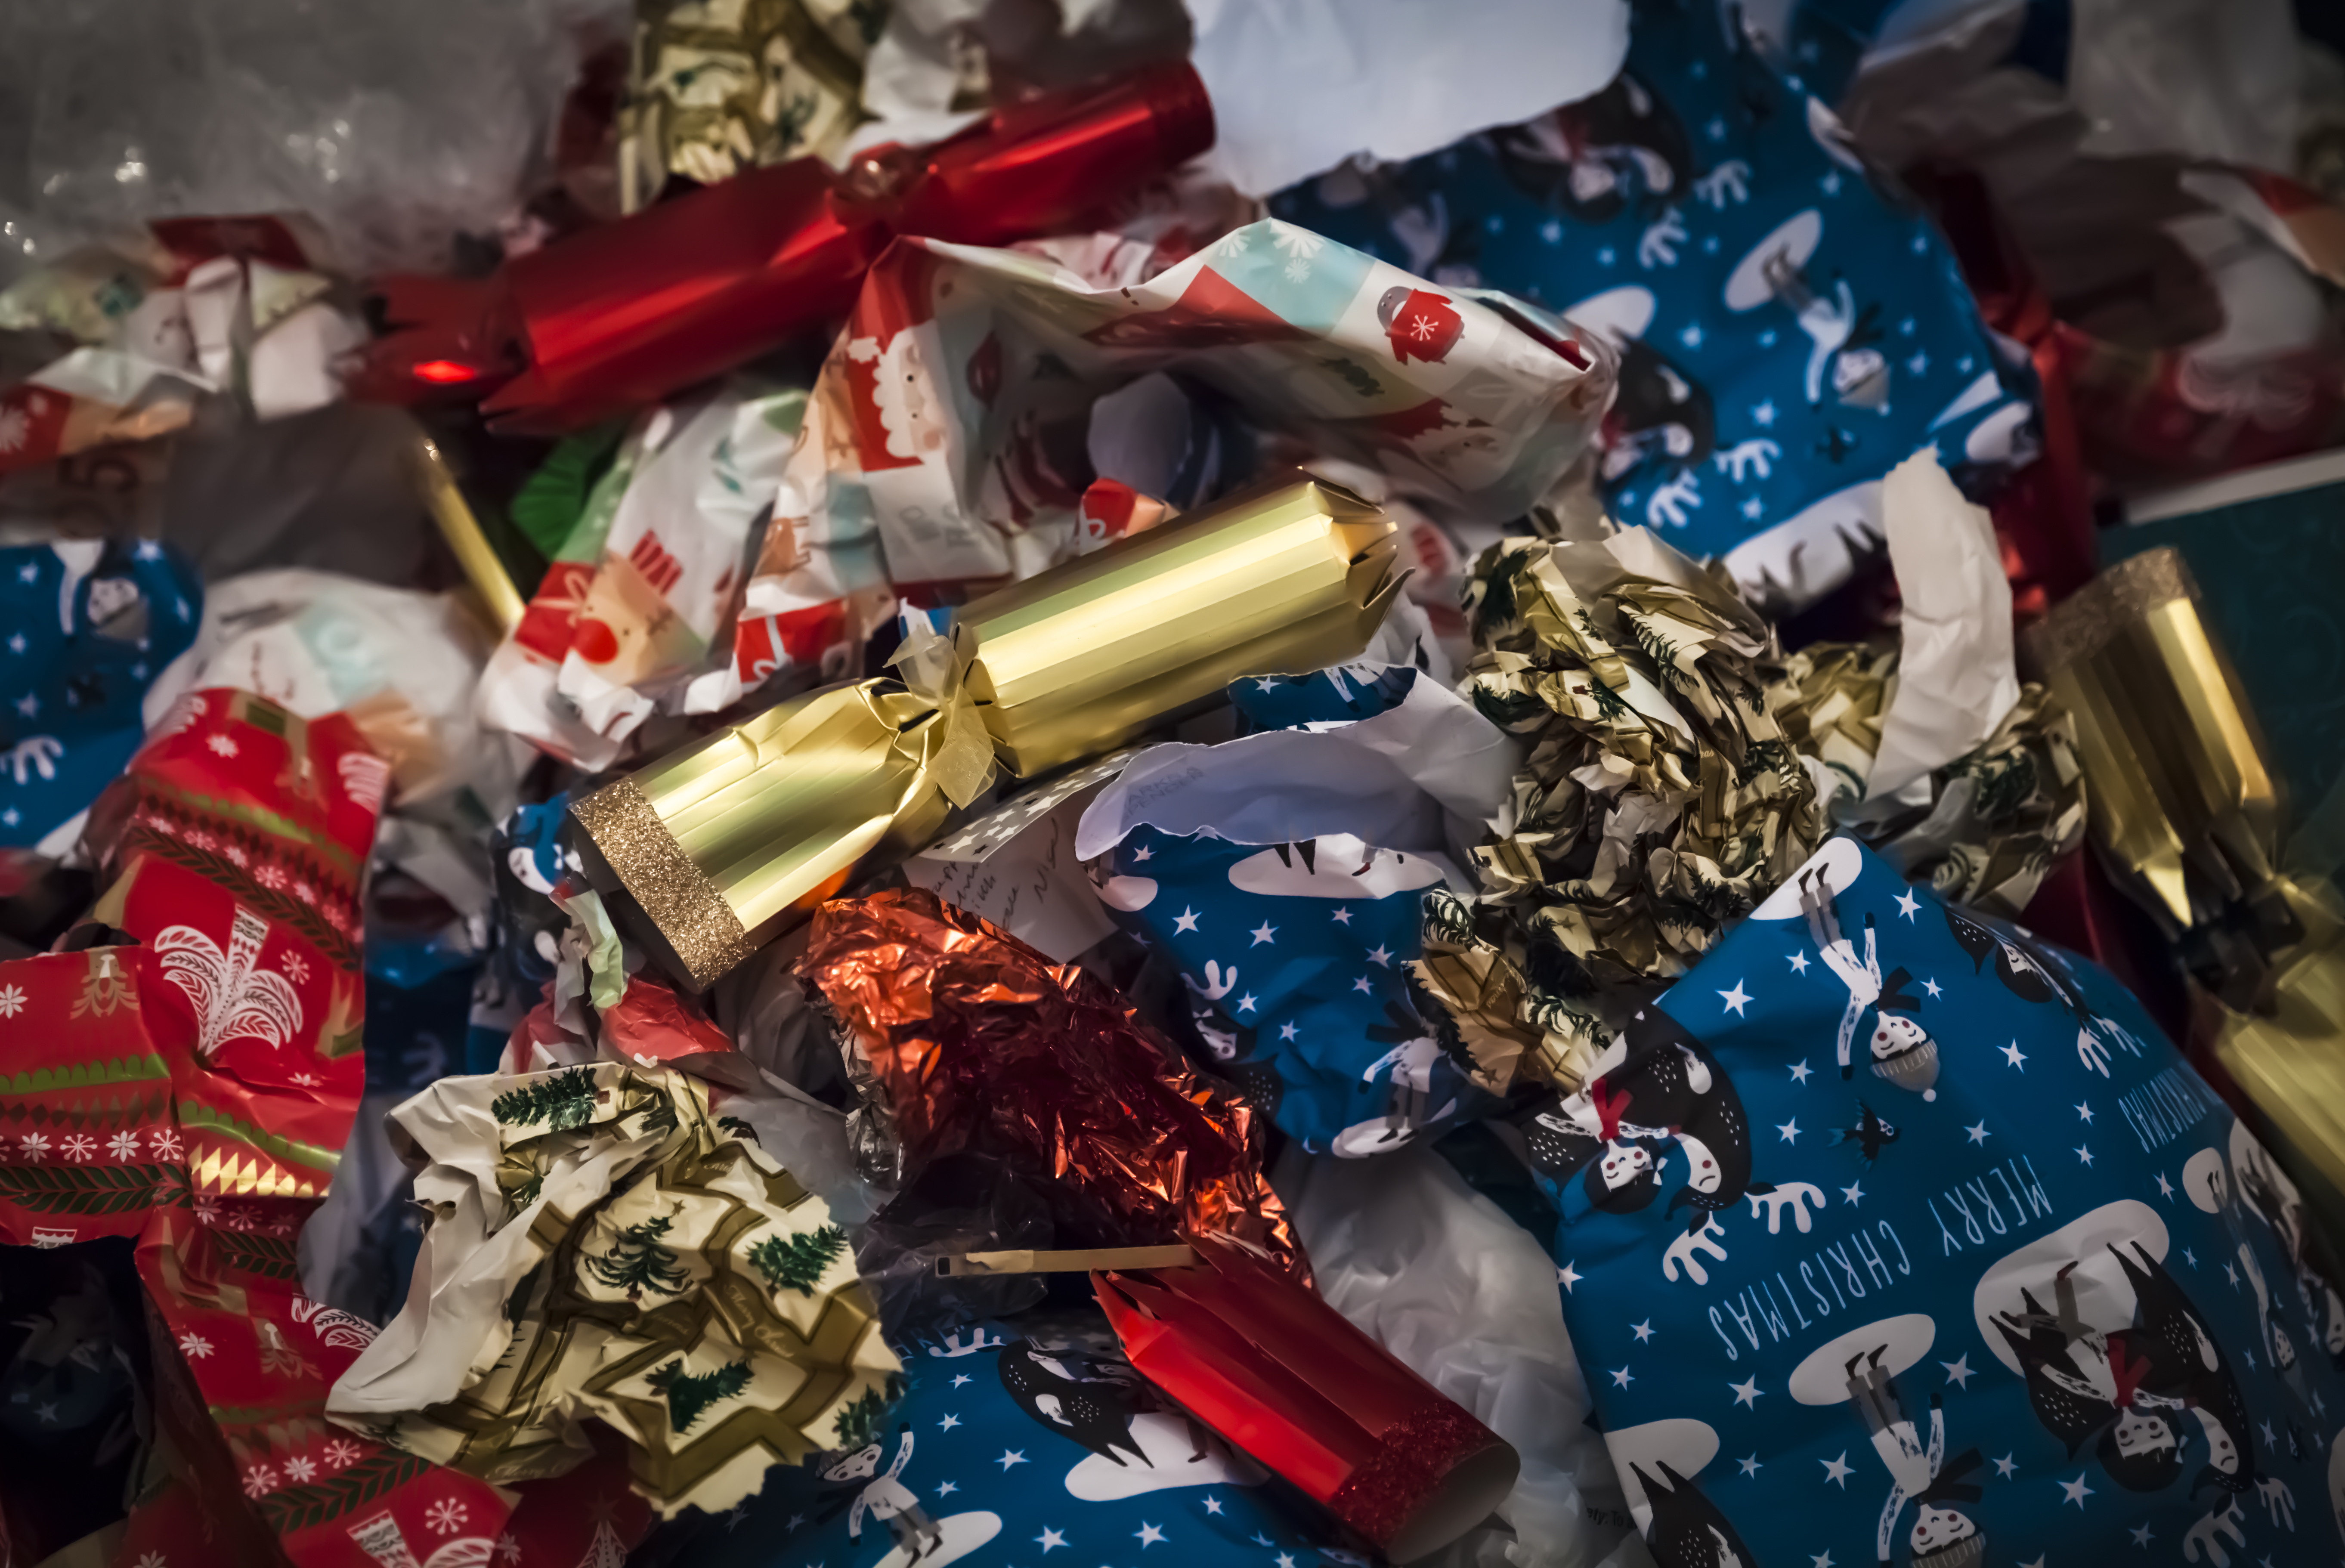 Pile of Christmas wrapping paper and discarded bonbons